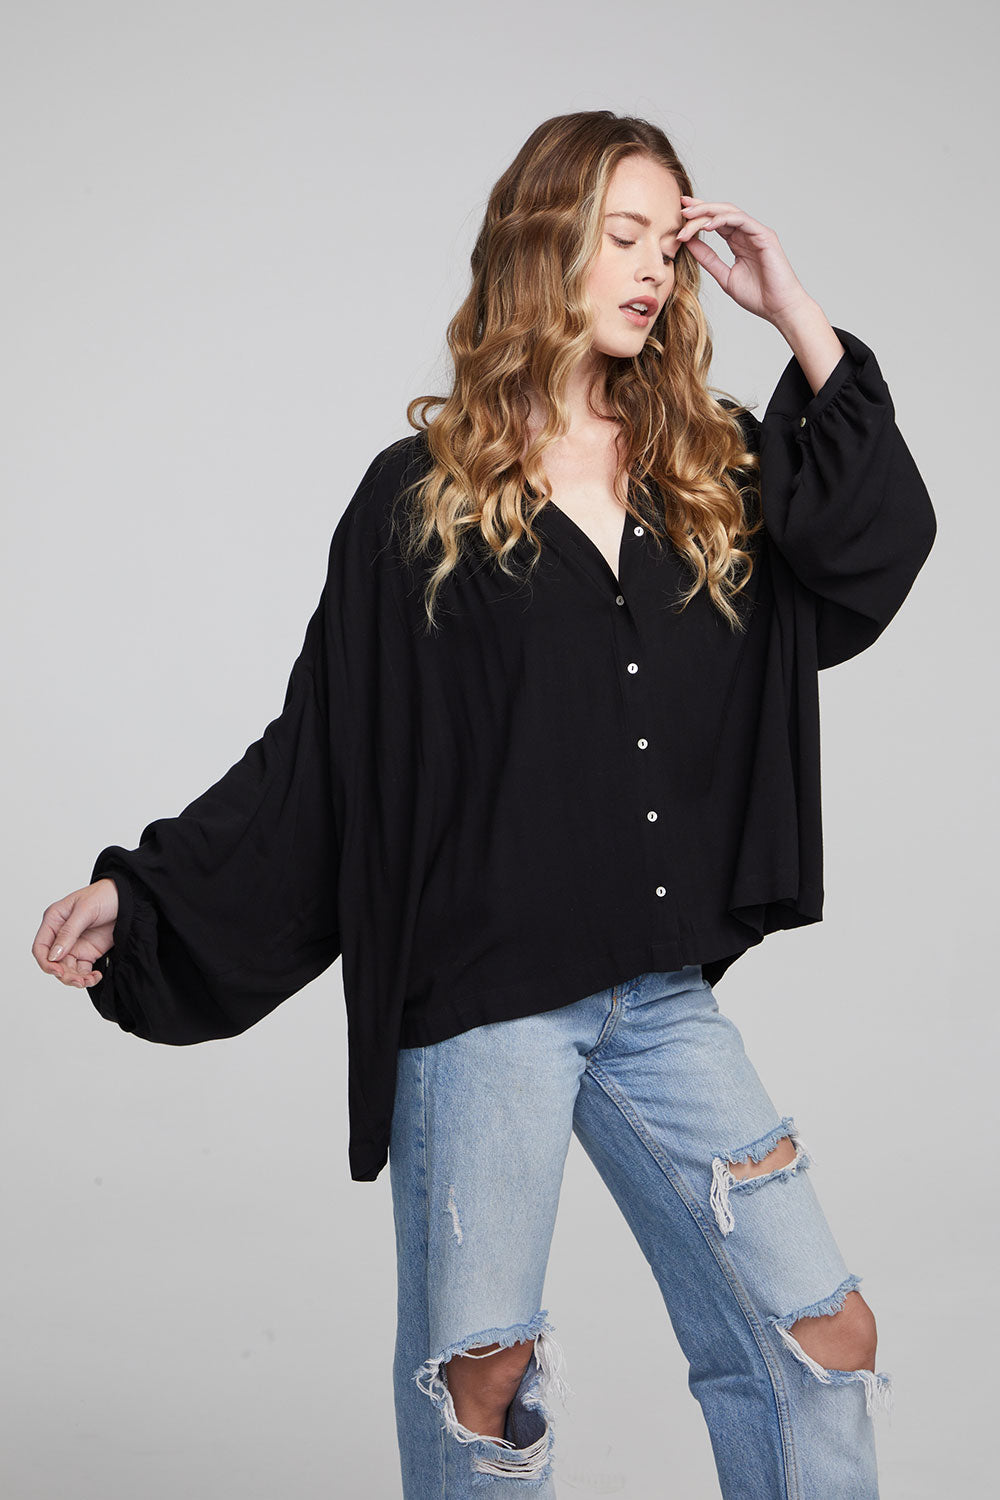 Idol Shadow Black Blouse WOMENS chaserbrand